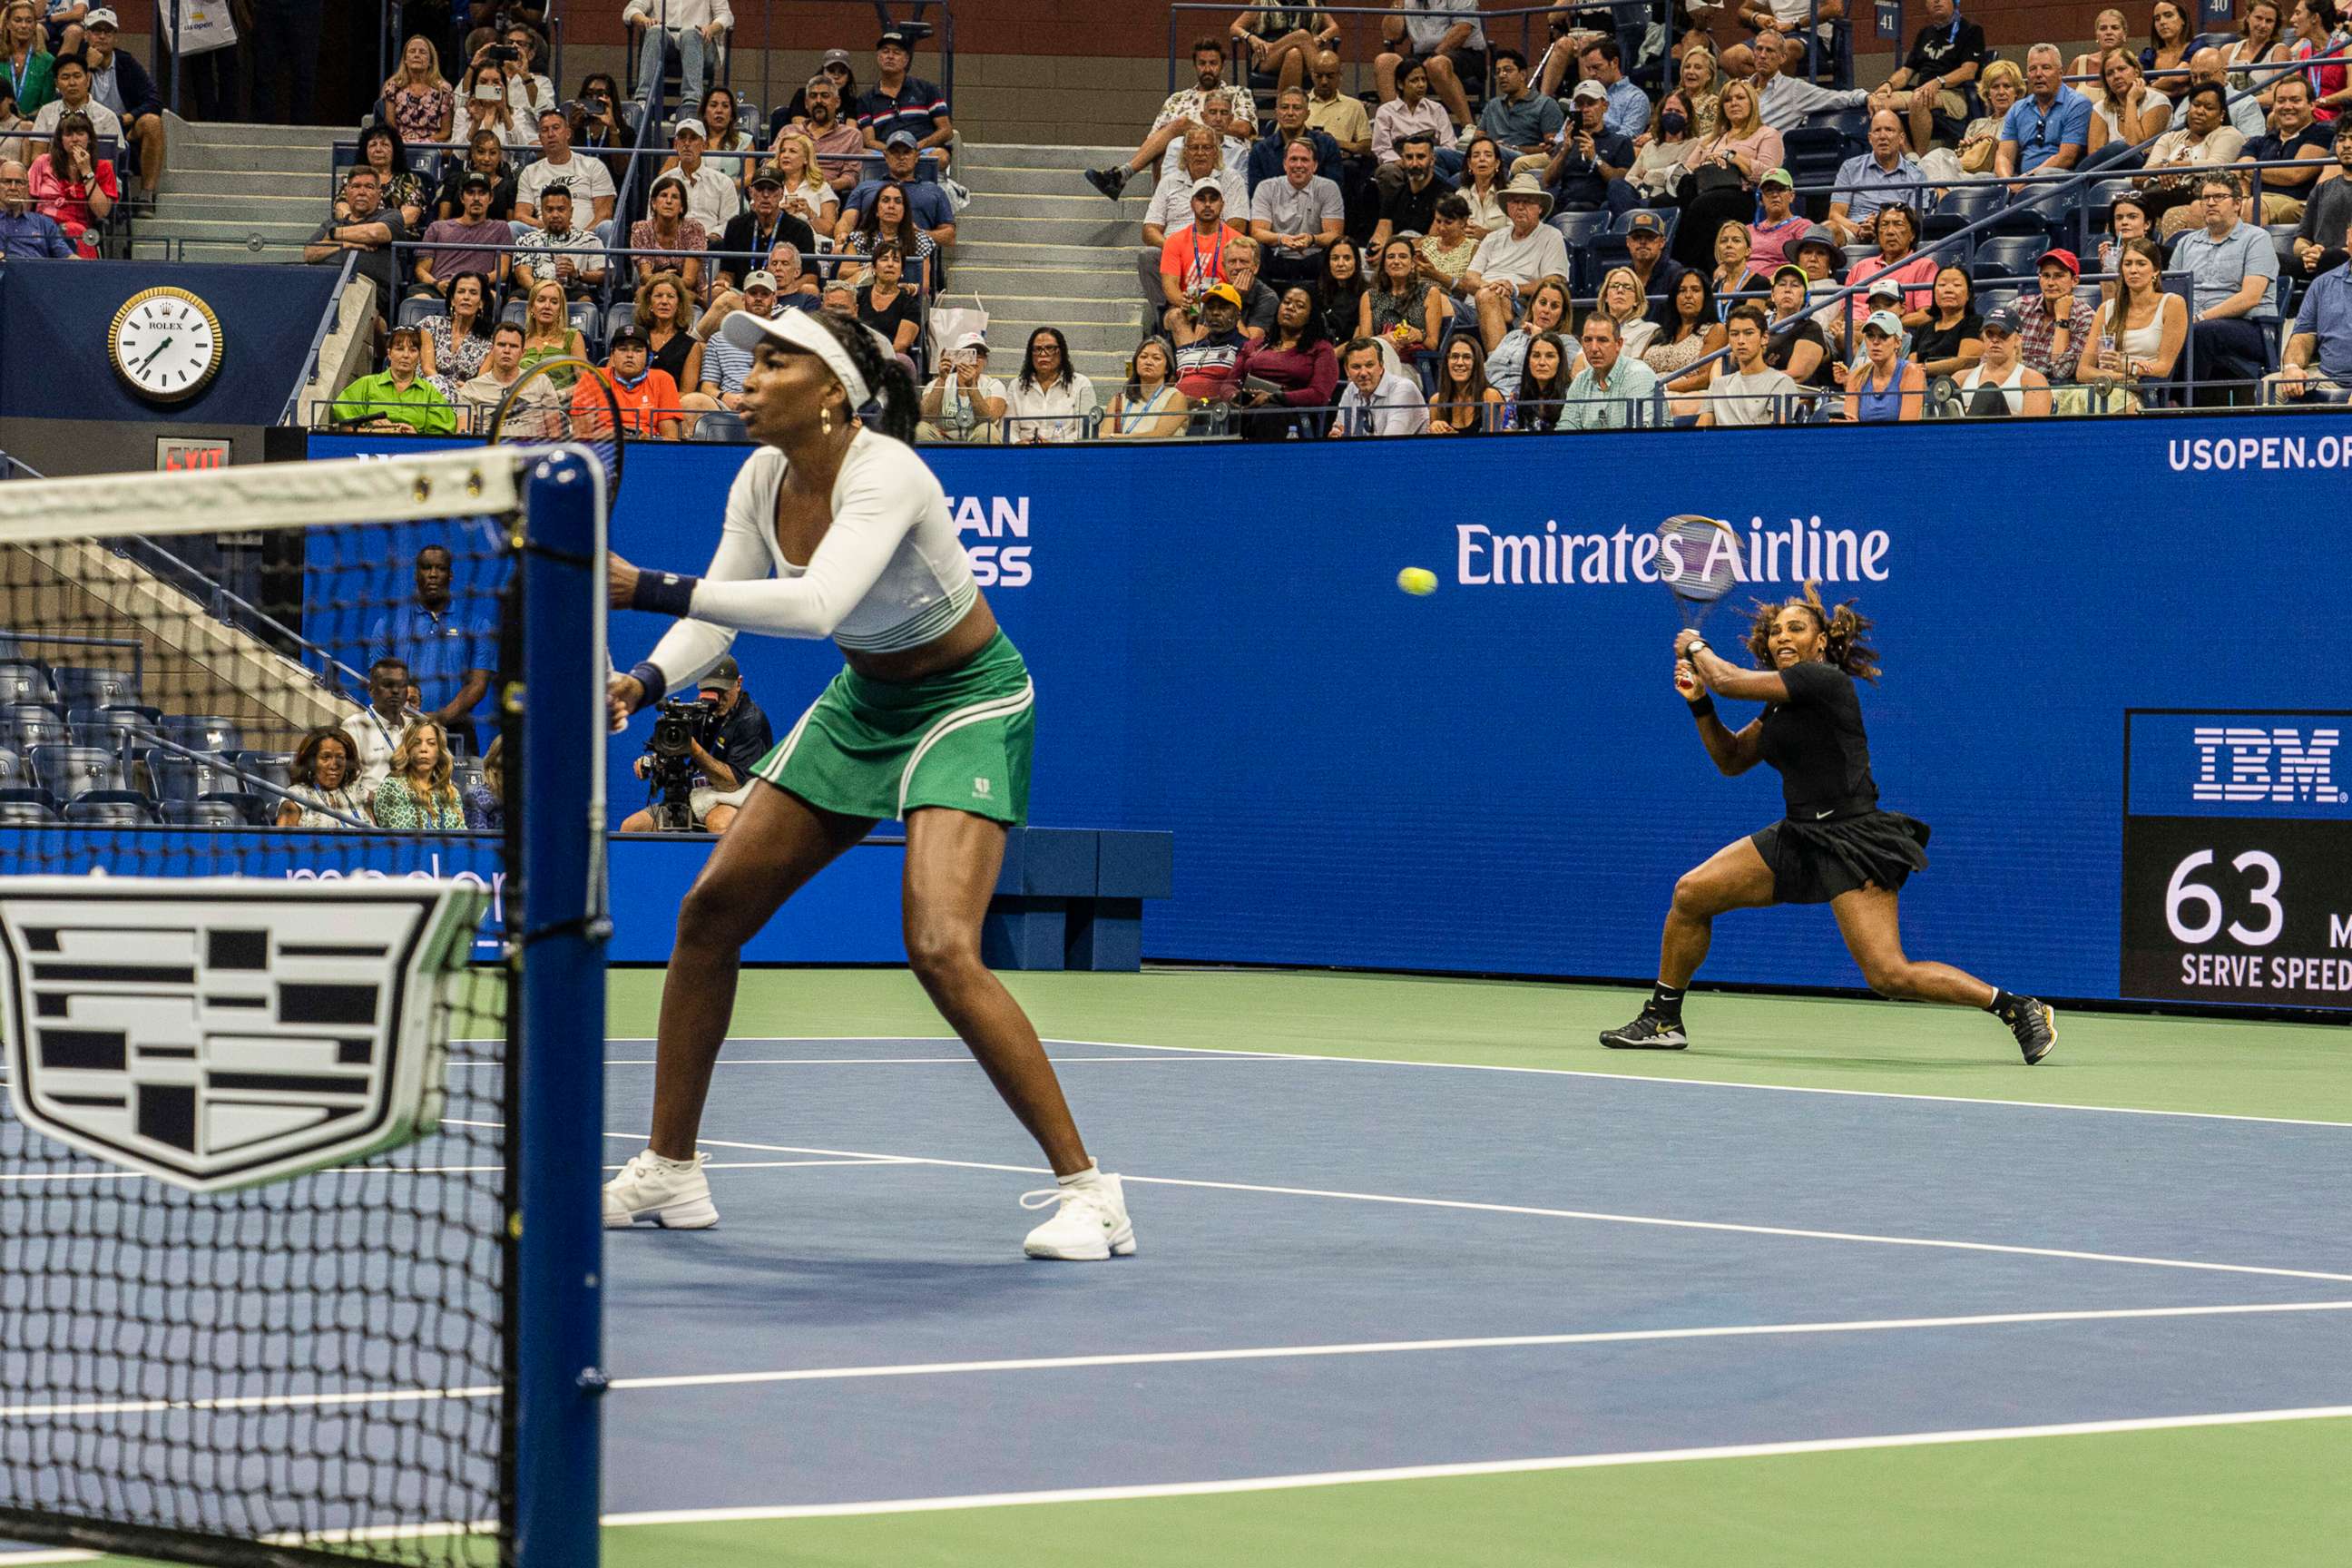 PHOTO: Venus and Serena Williams play the first round of Women's Doubles against Lucie Hradecka and Linda Noskova on the fourth day of the US Open in Queens, New York, Sept. 1, 2022. 